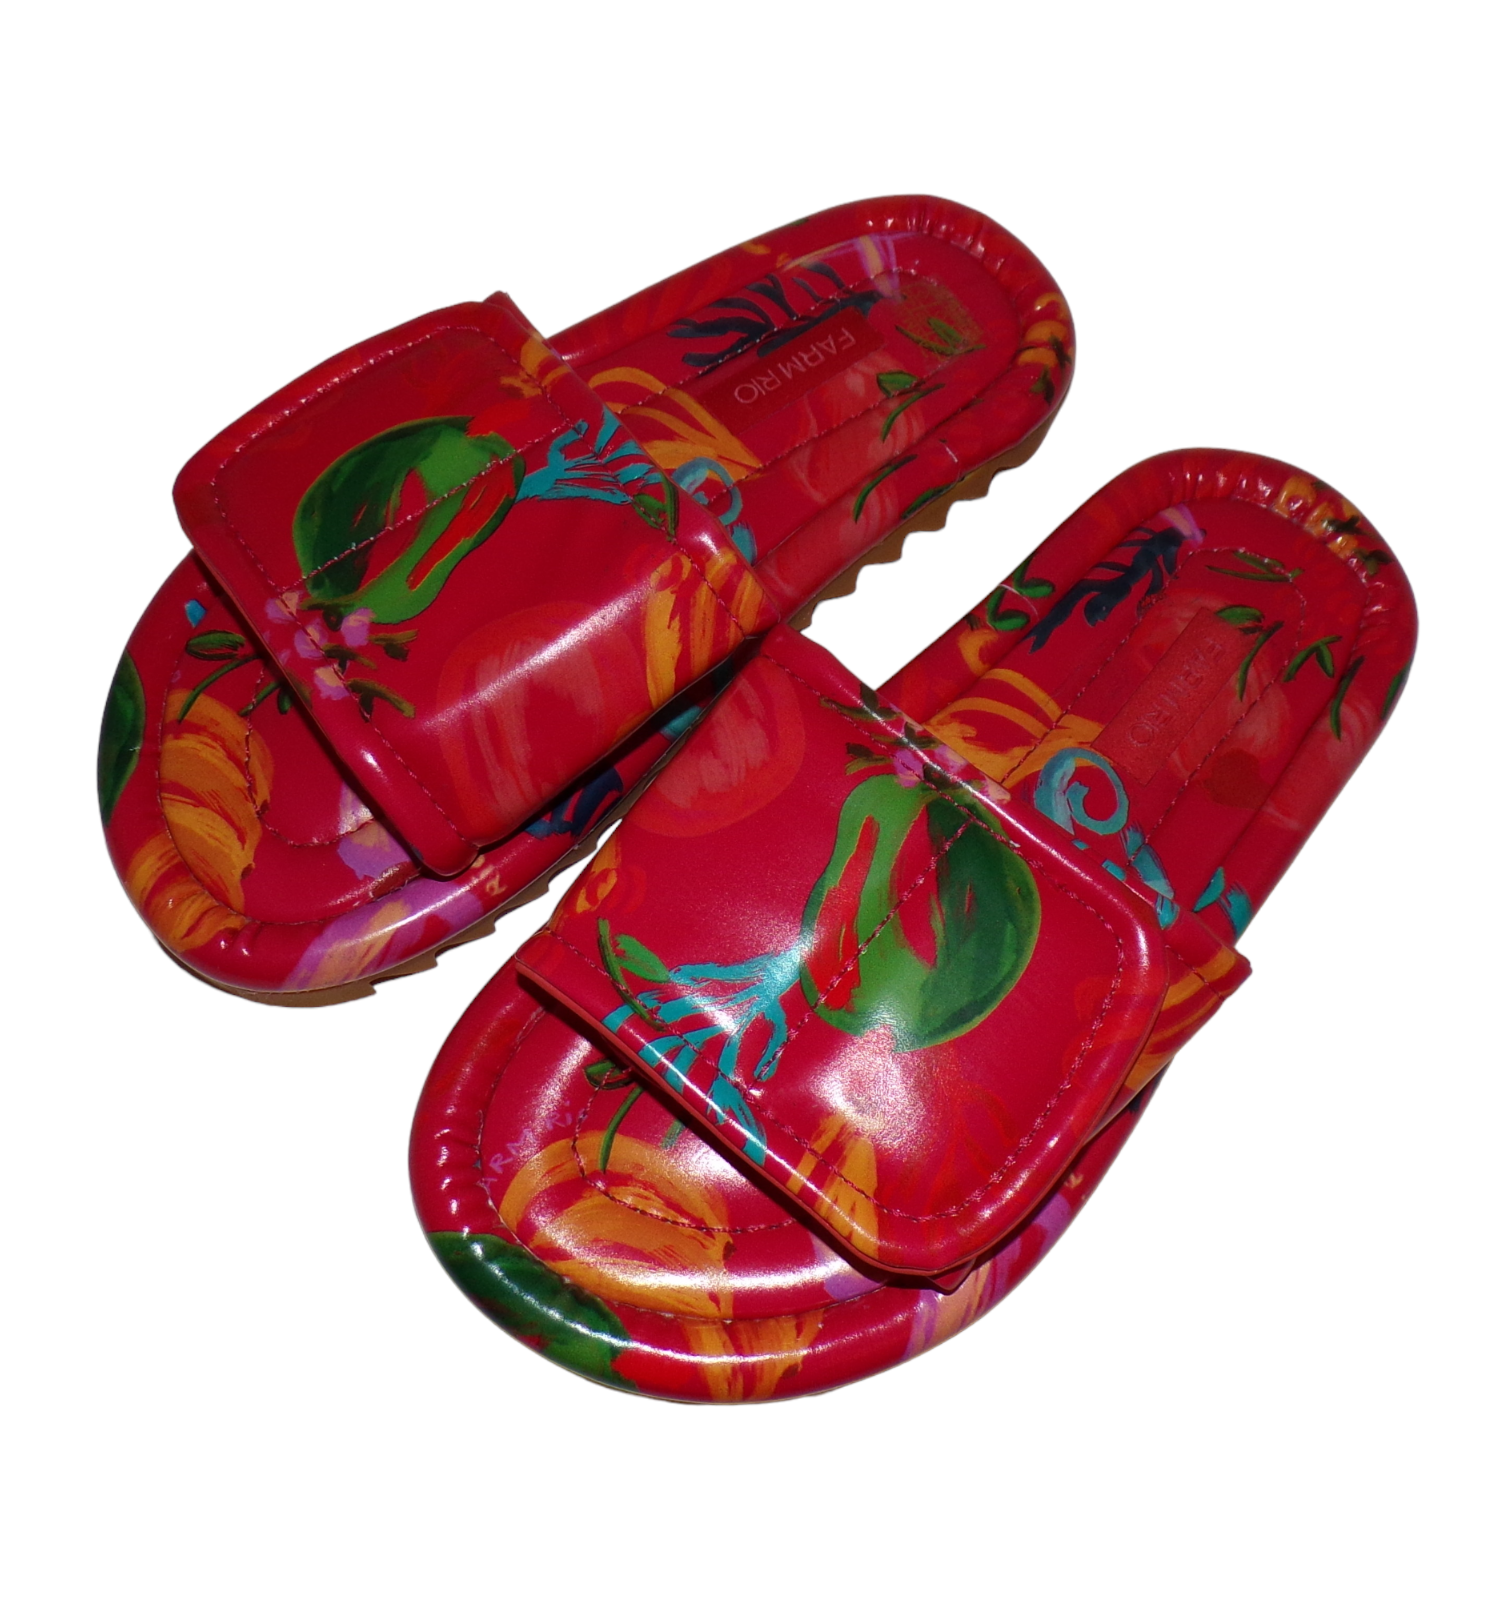 Primary image for Anthropologie Farm Rio Puffy Slides Sandals Shoes Size 8, Lk Nw